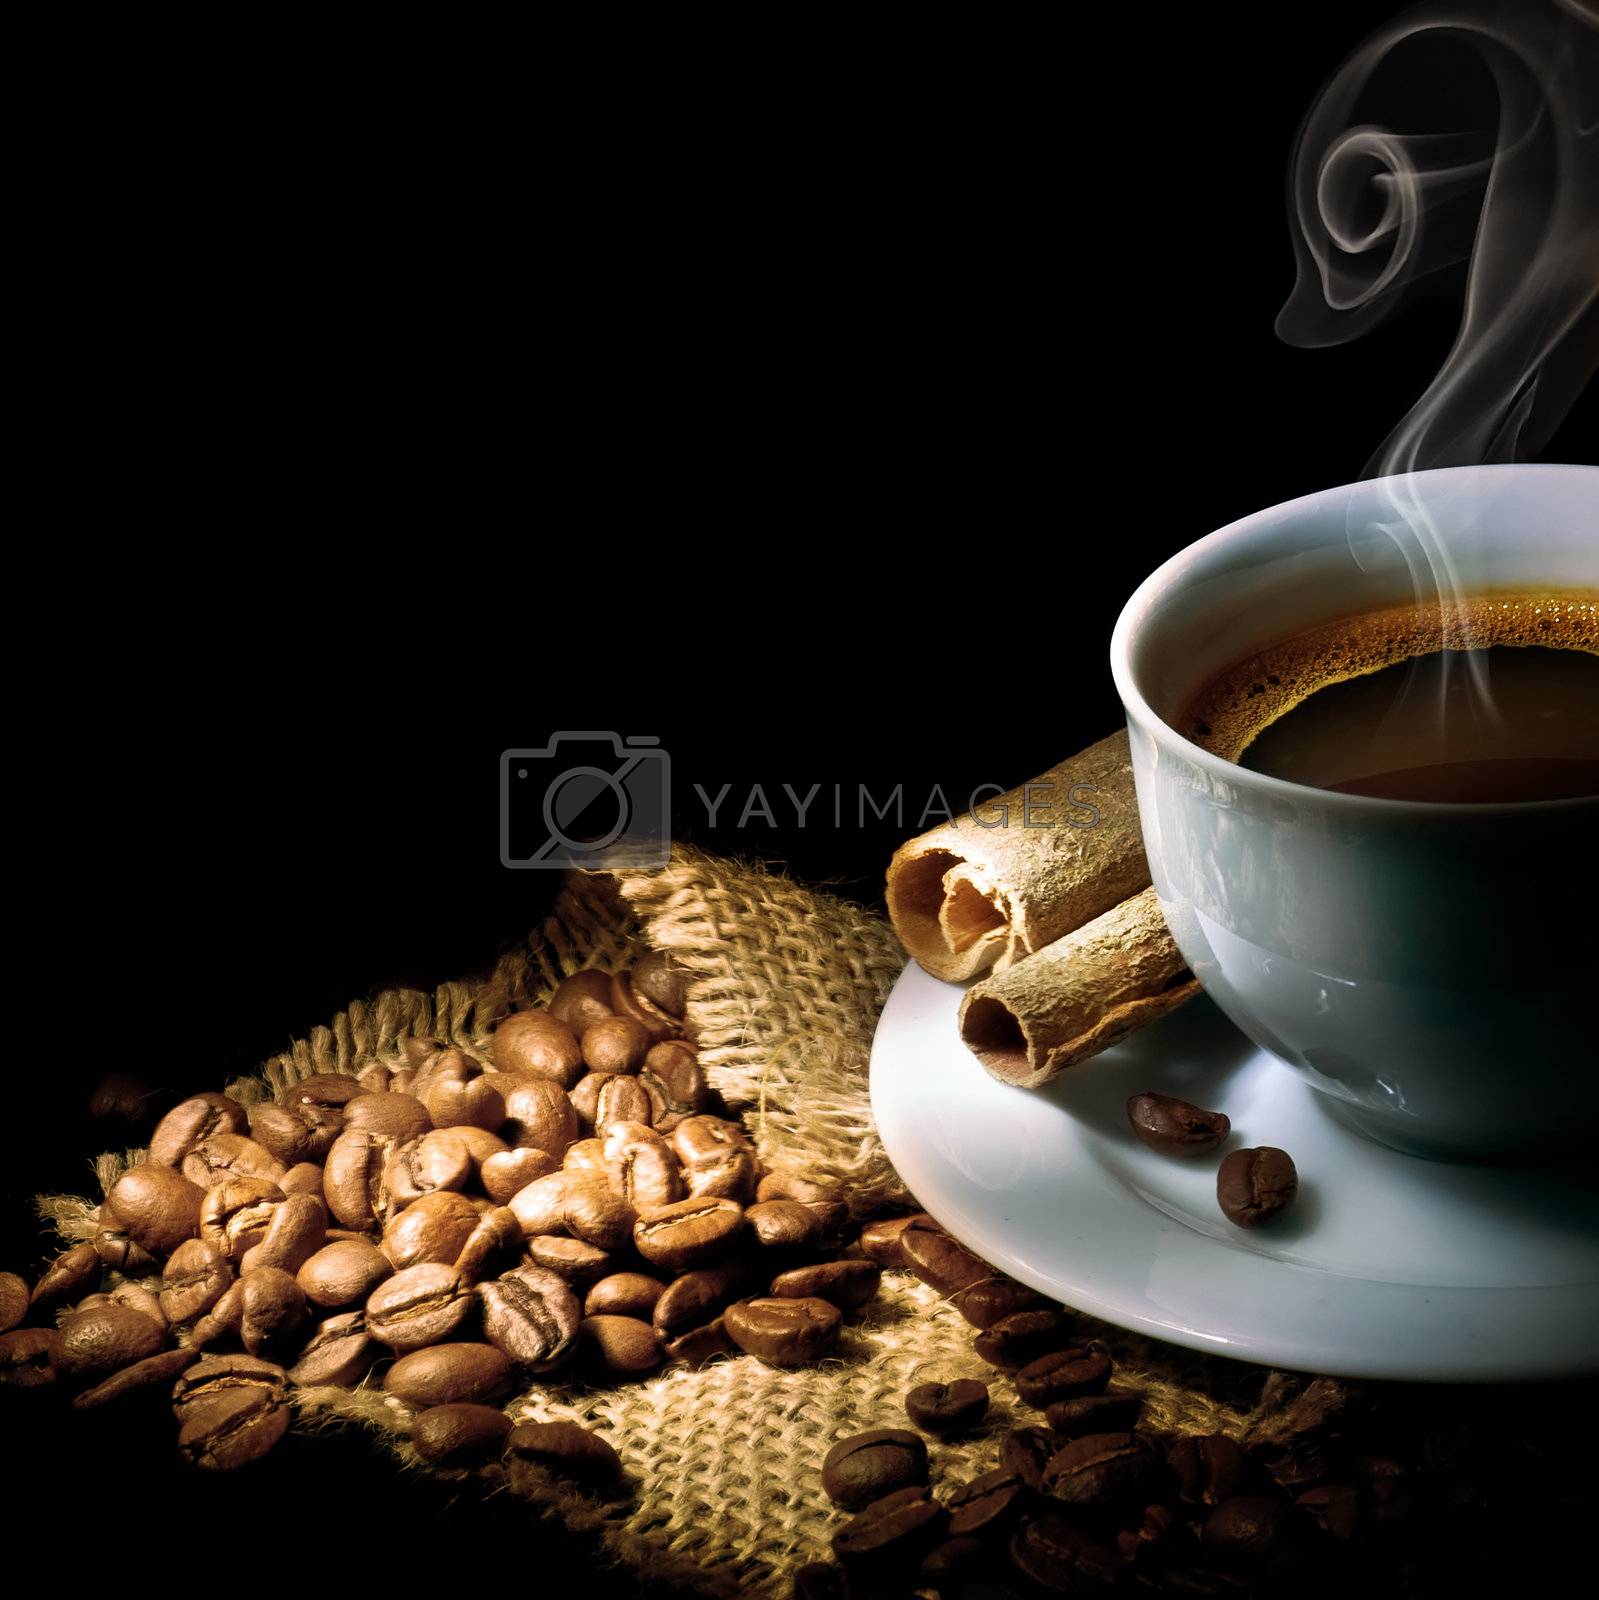 Royalty free image of Coffee by SubbotinaA